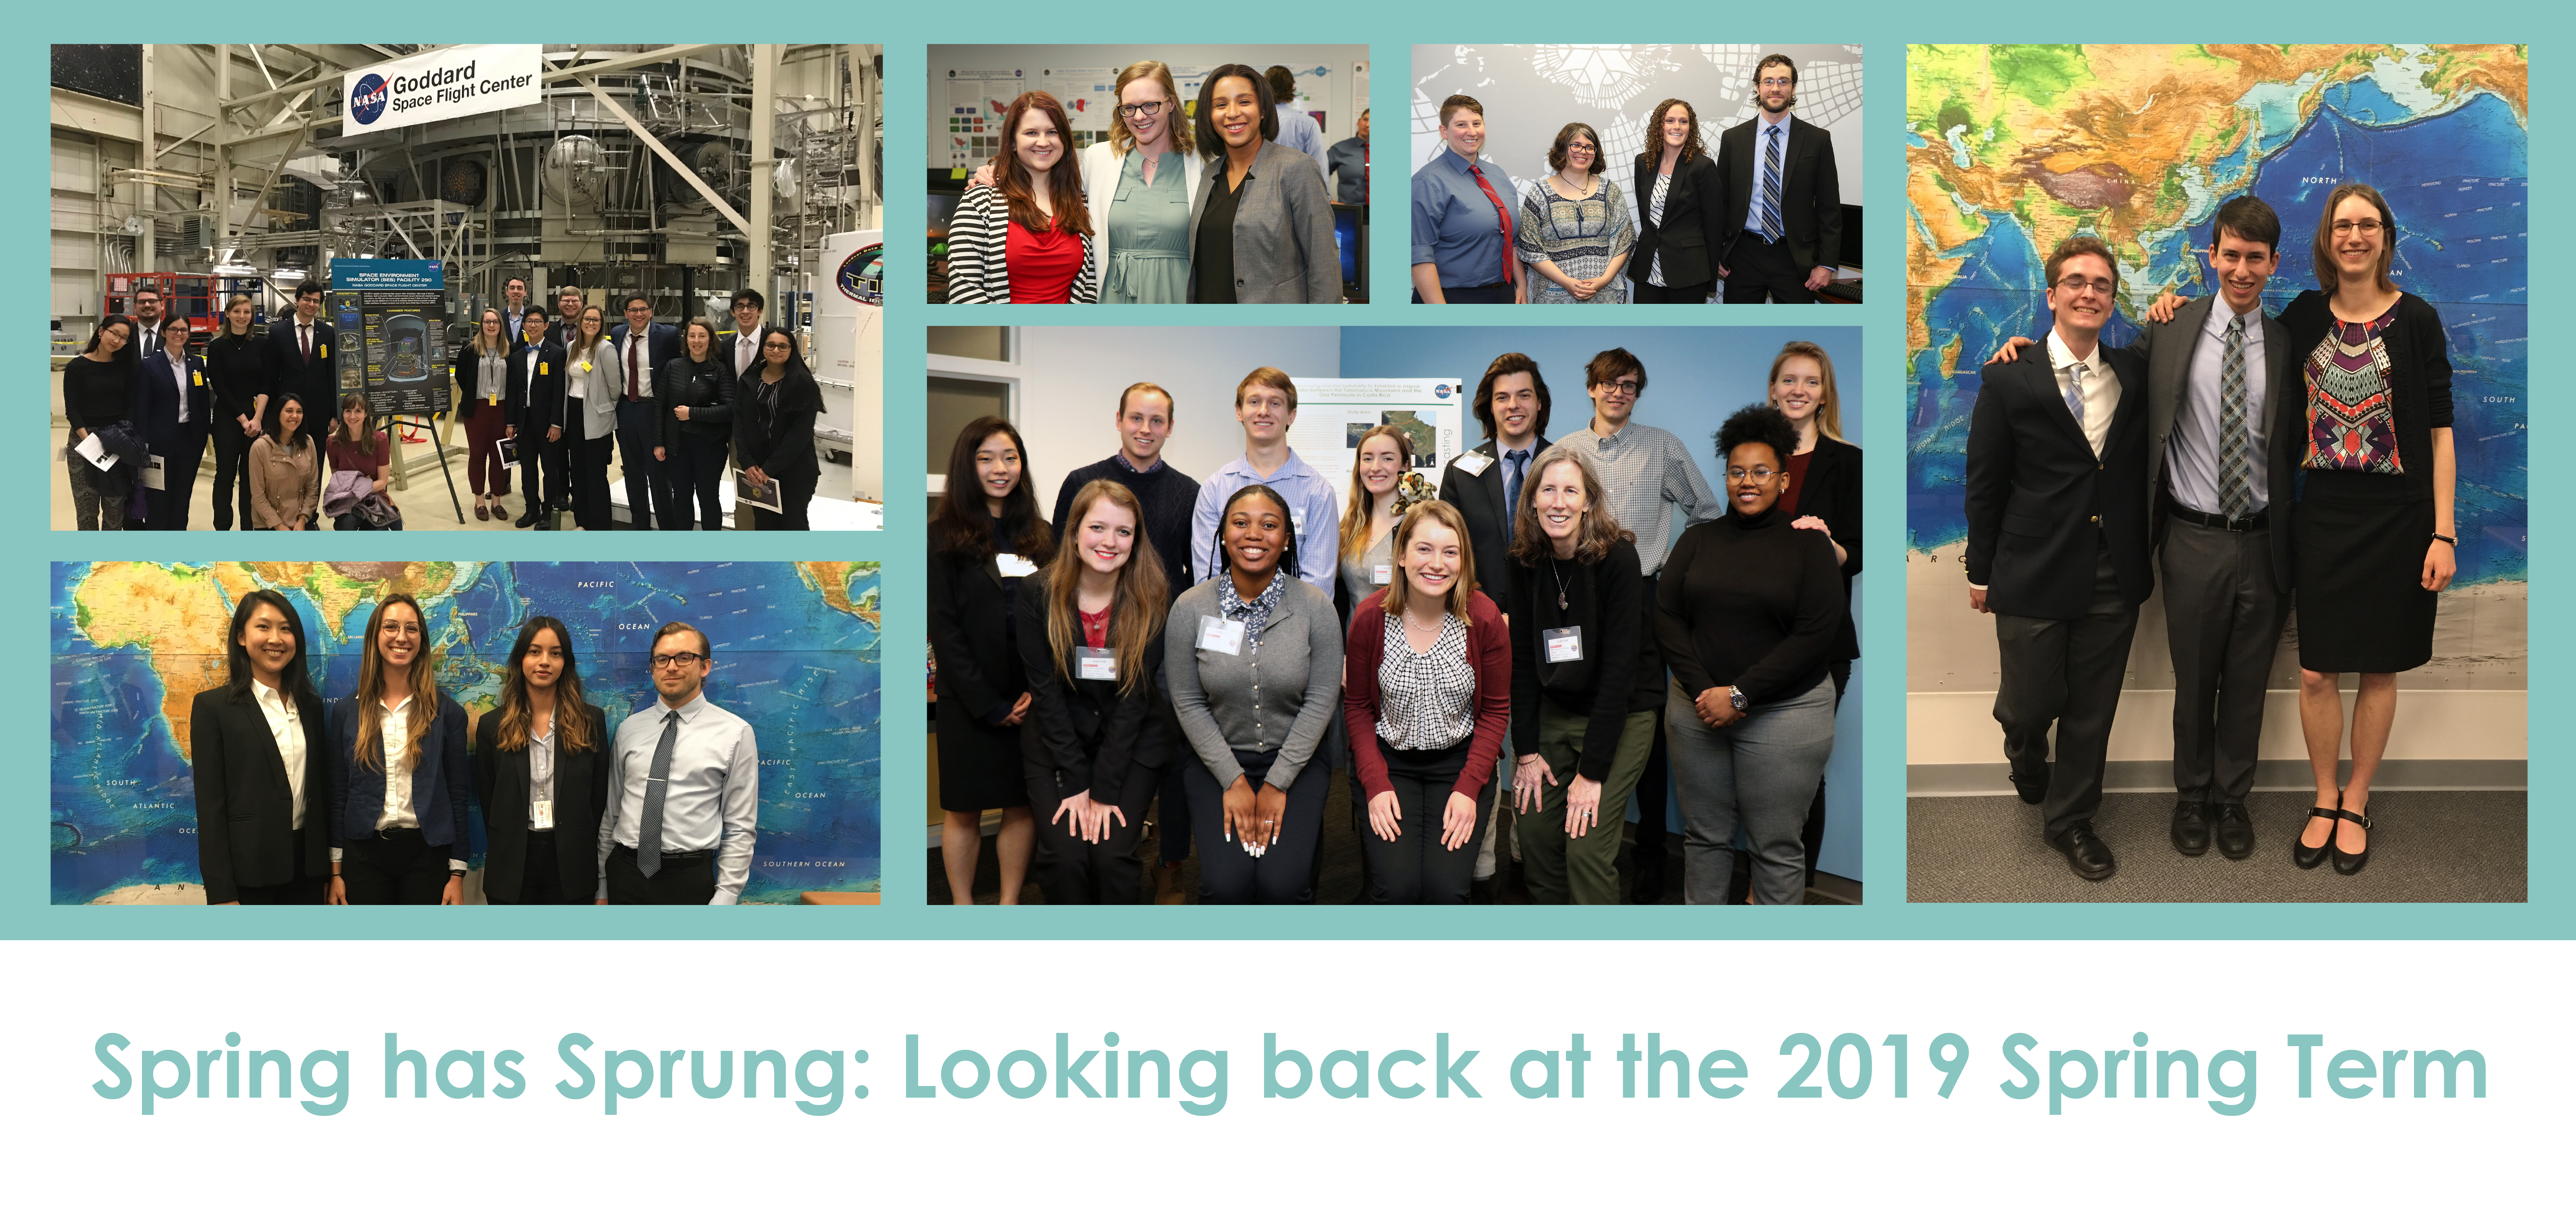 Spring has Sprung: Looking Back at the 2019 Spring Term